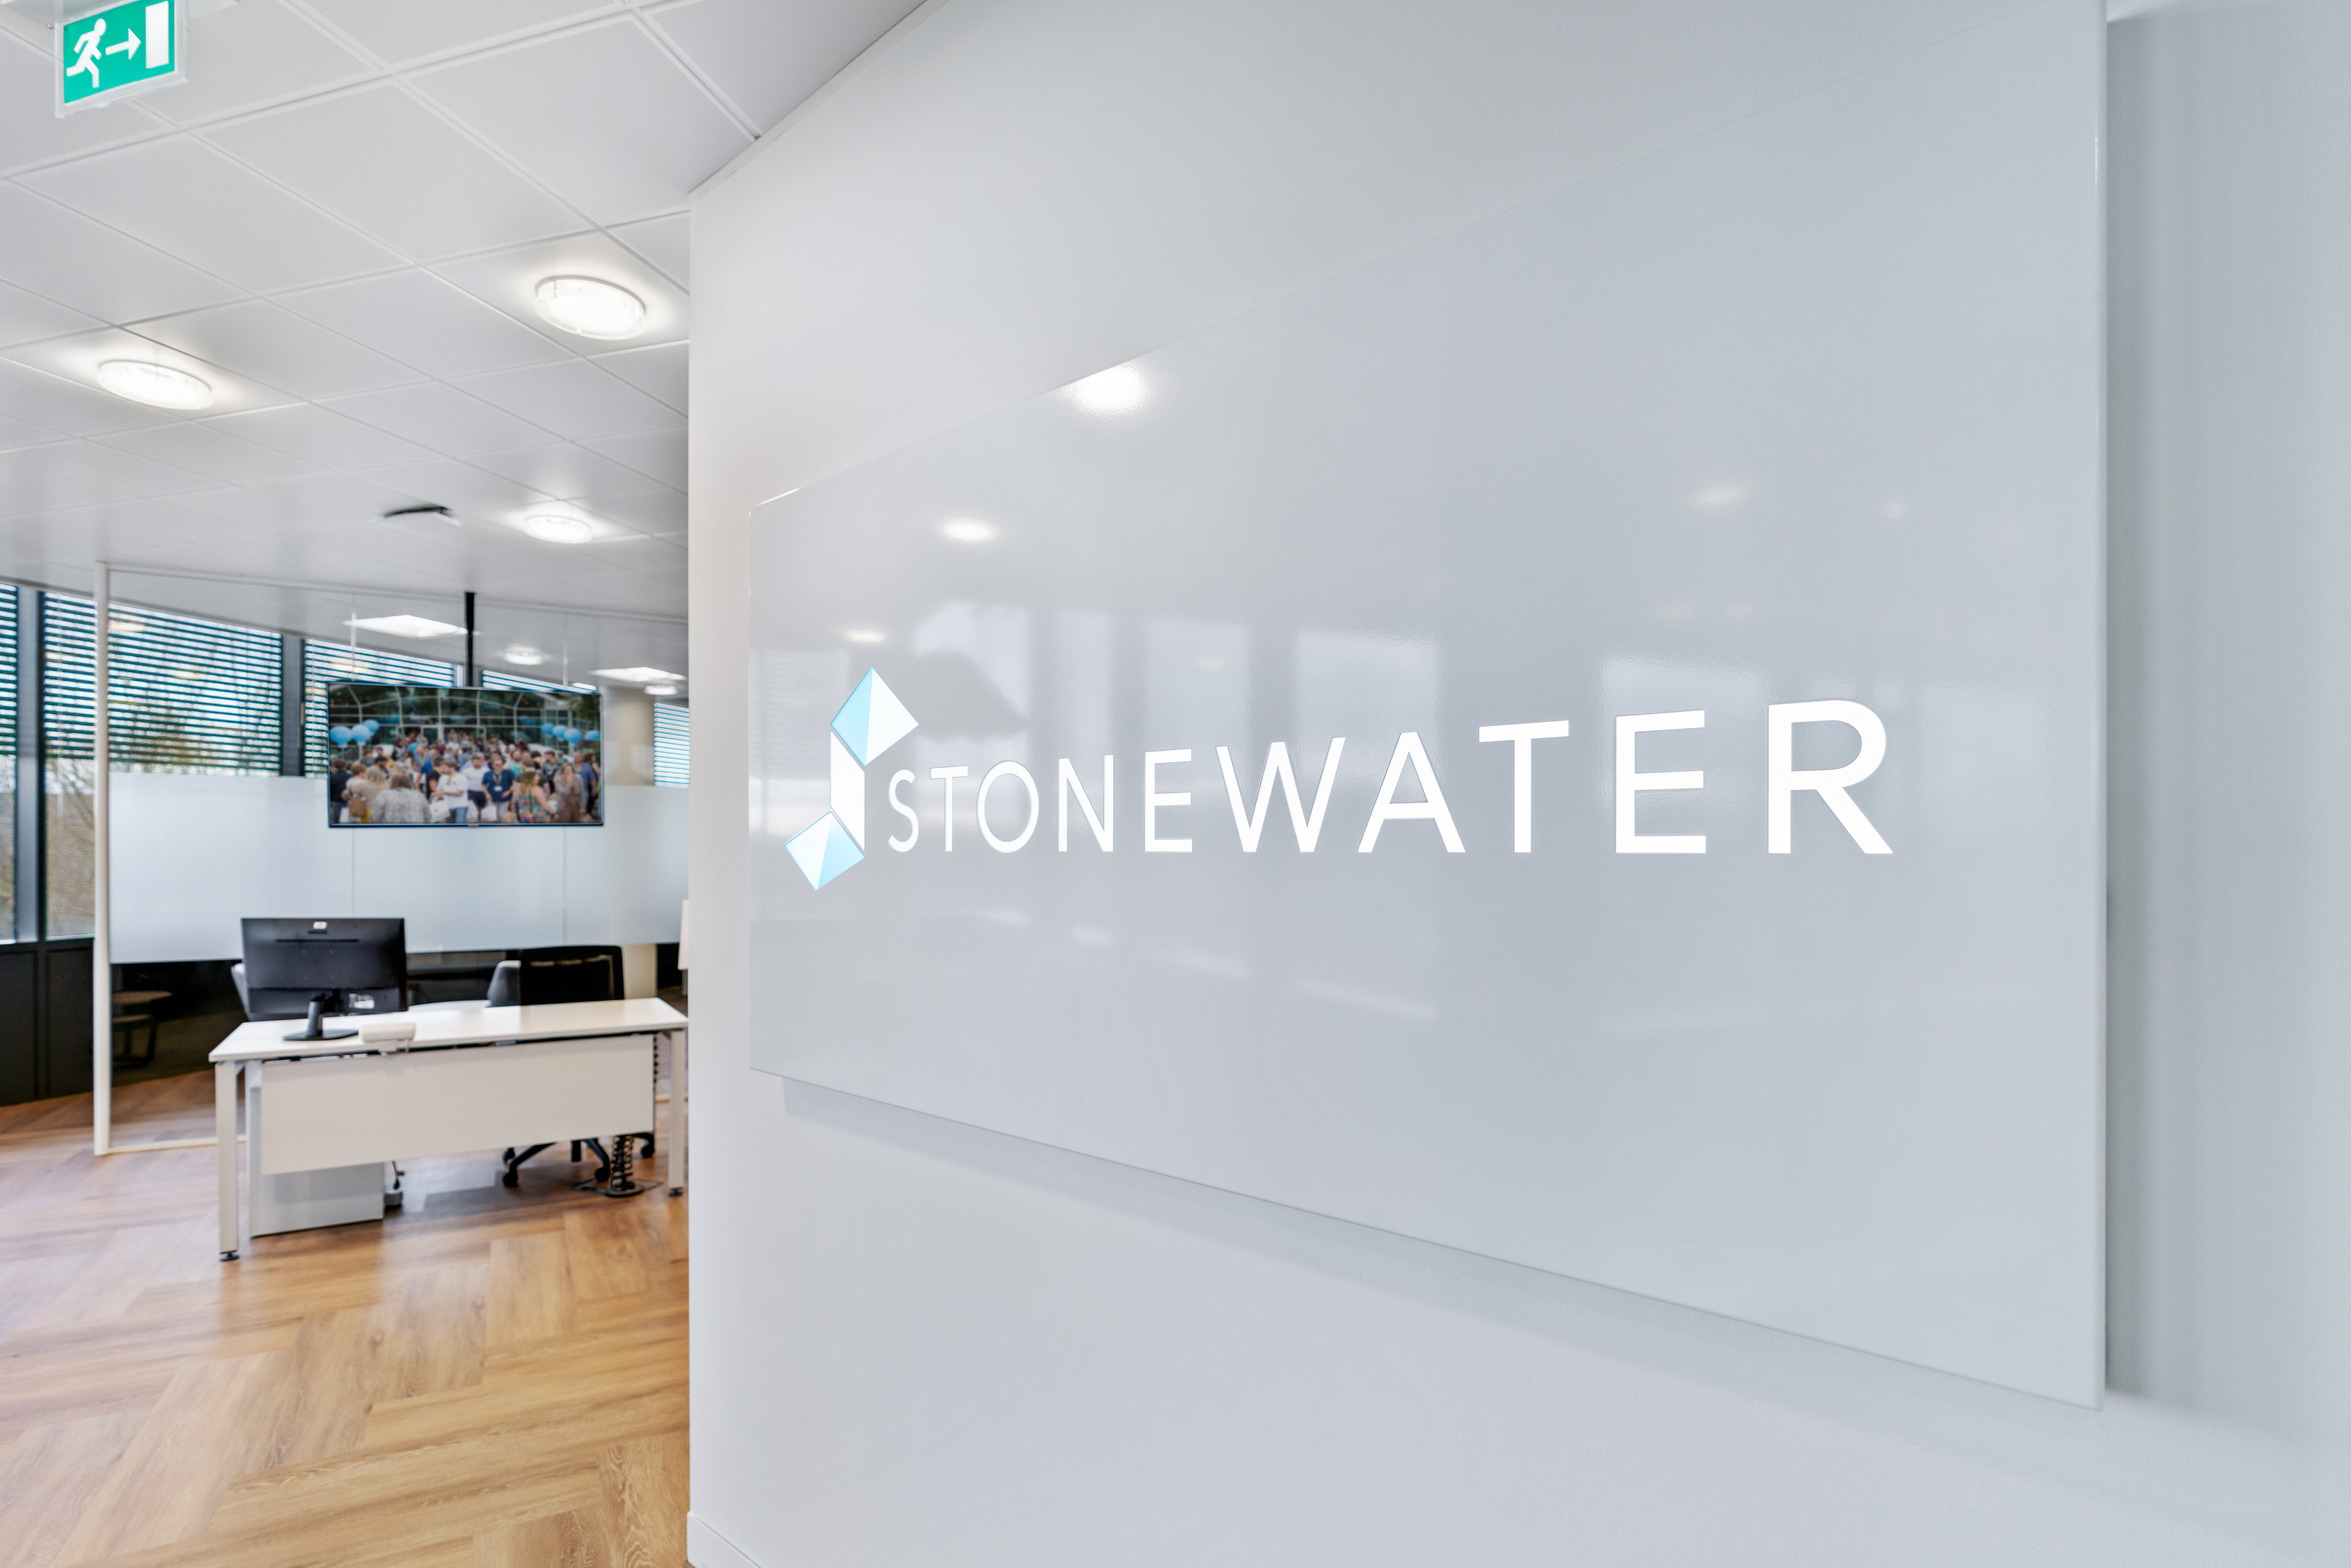 Close-up of Stonewater logo on glass panel in office, with reception desk in background